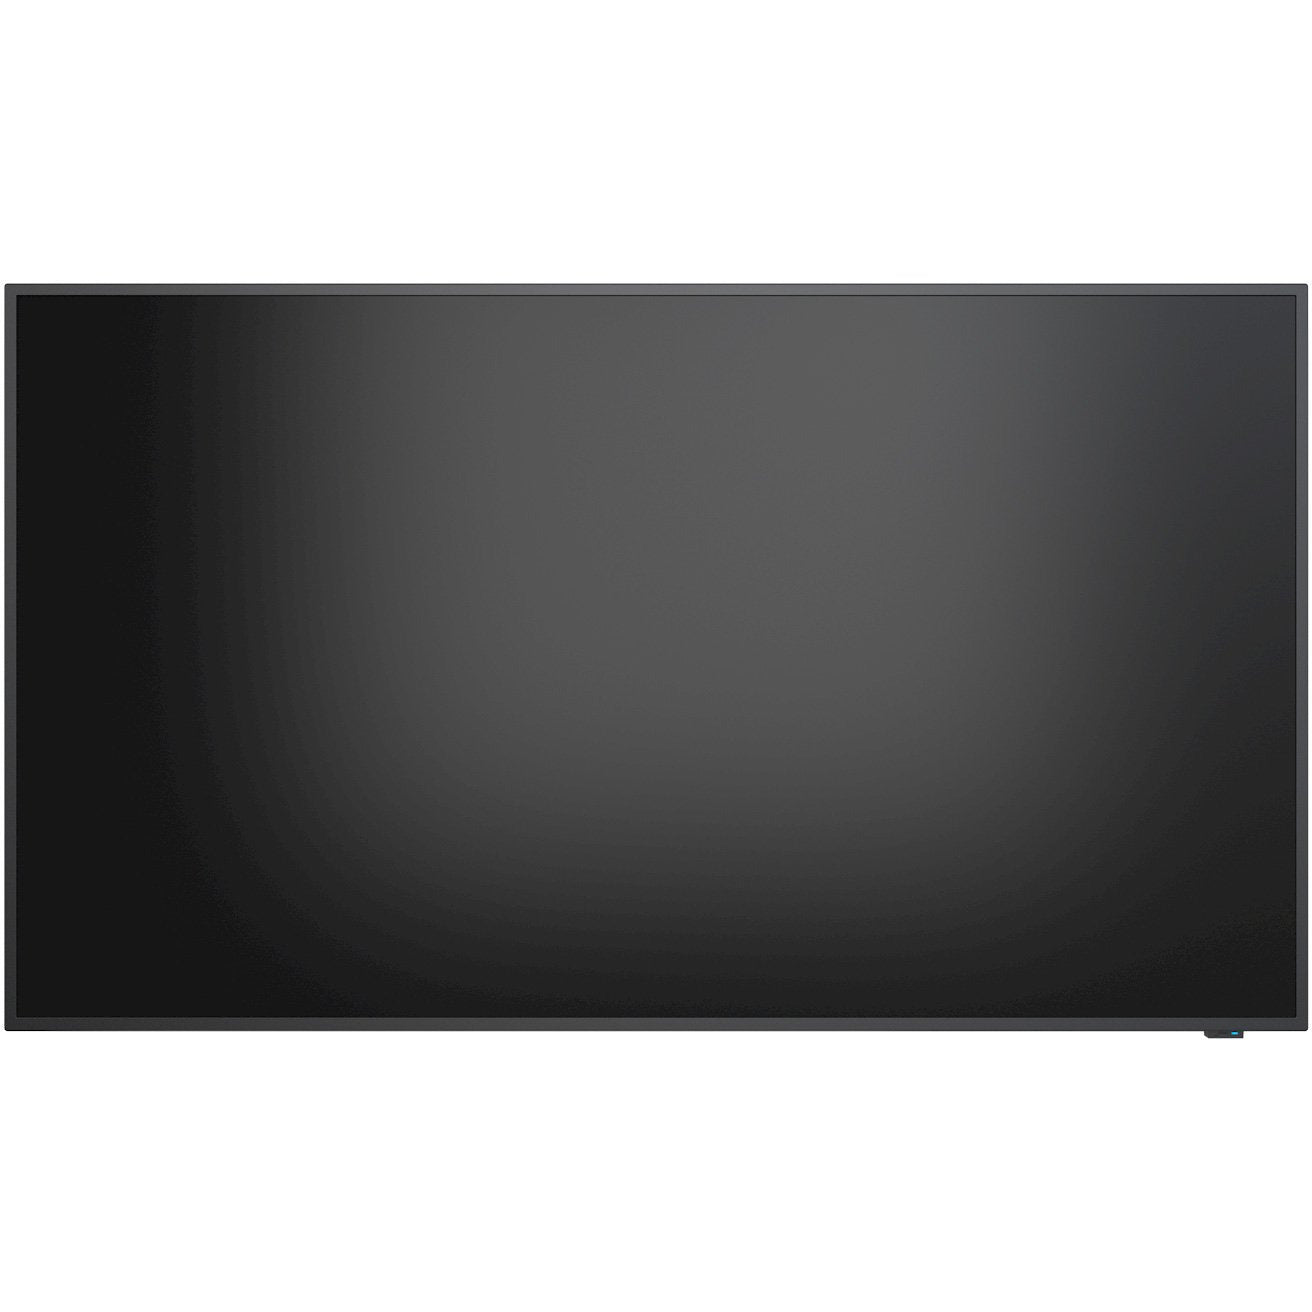 NEC MultiSync® E438 LCD 43" Essential Large Format Display